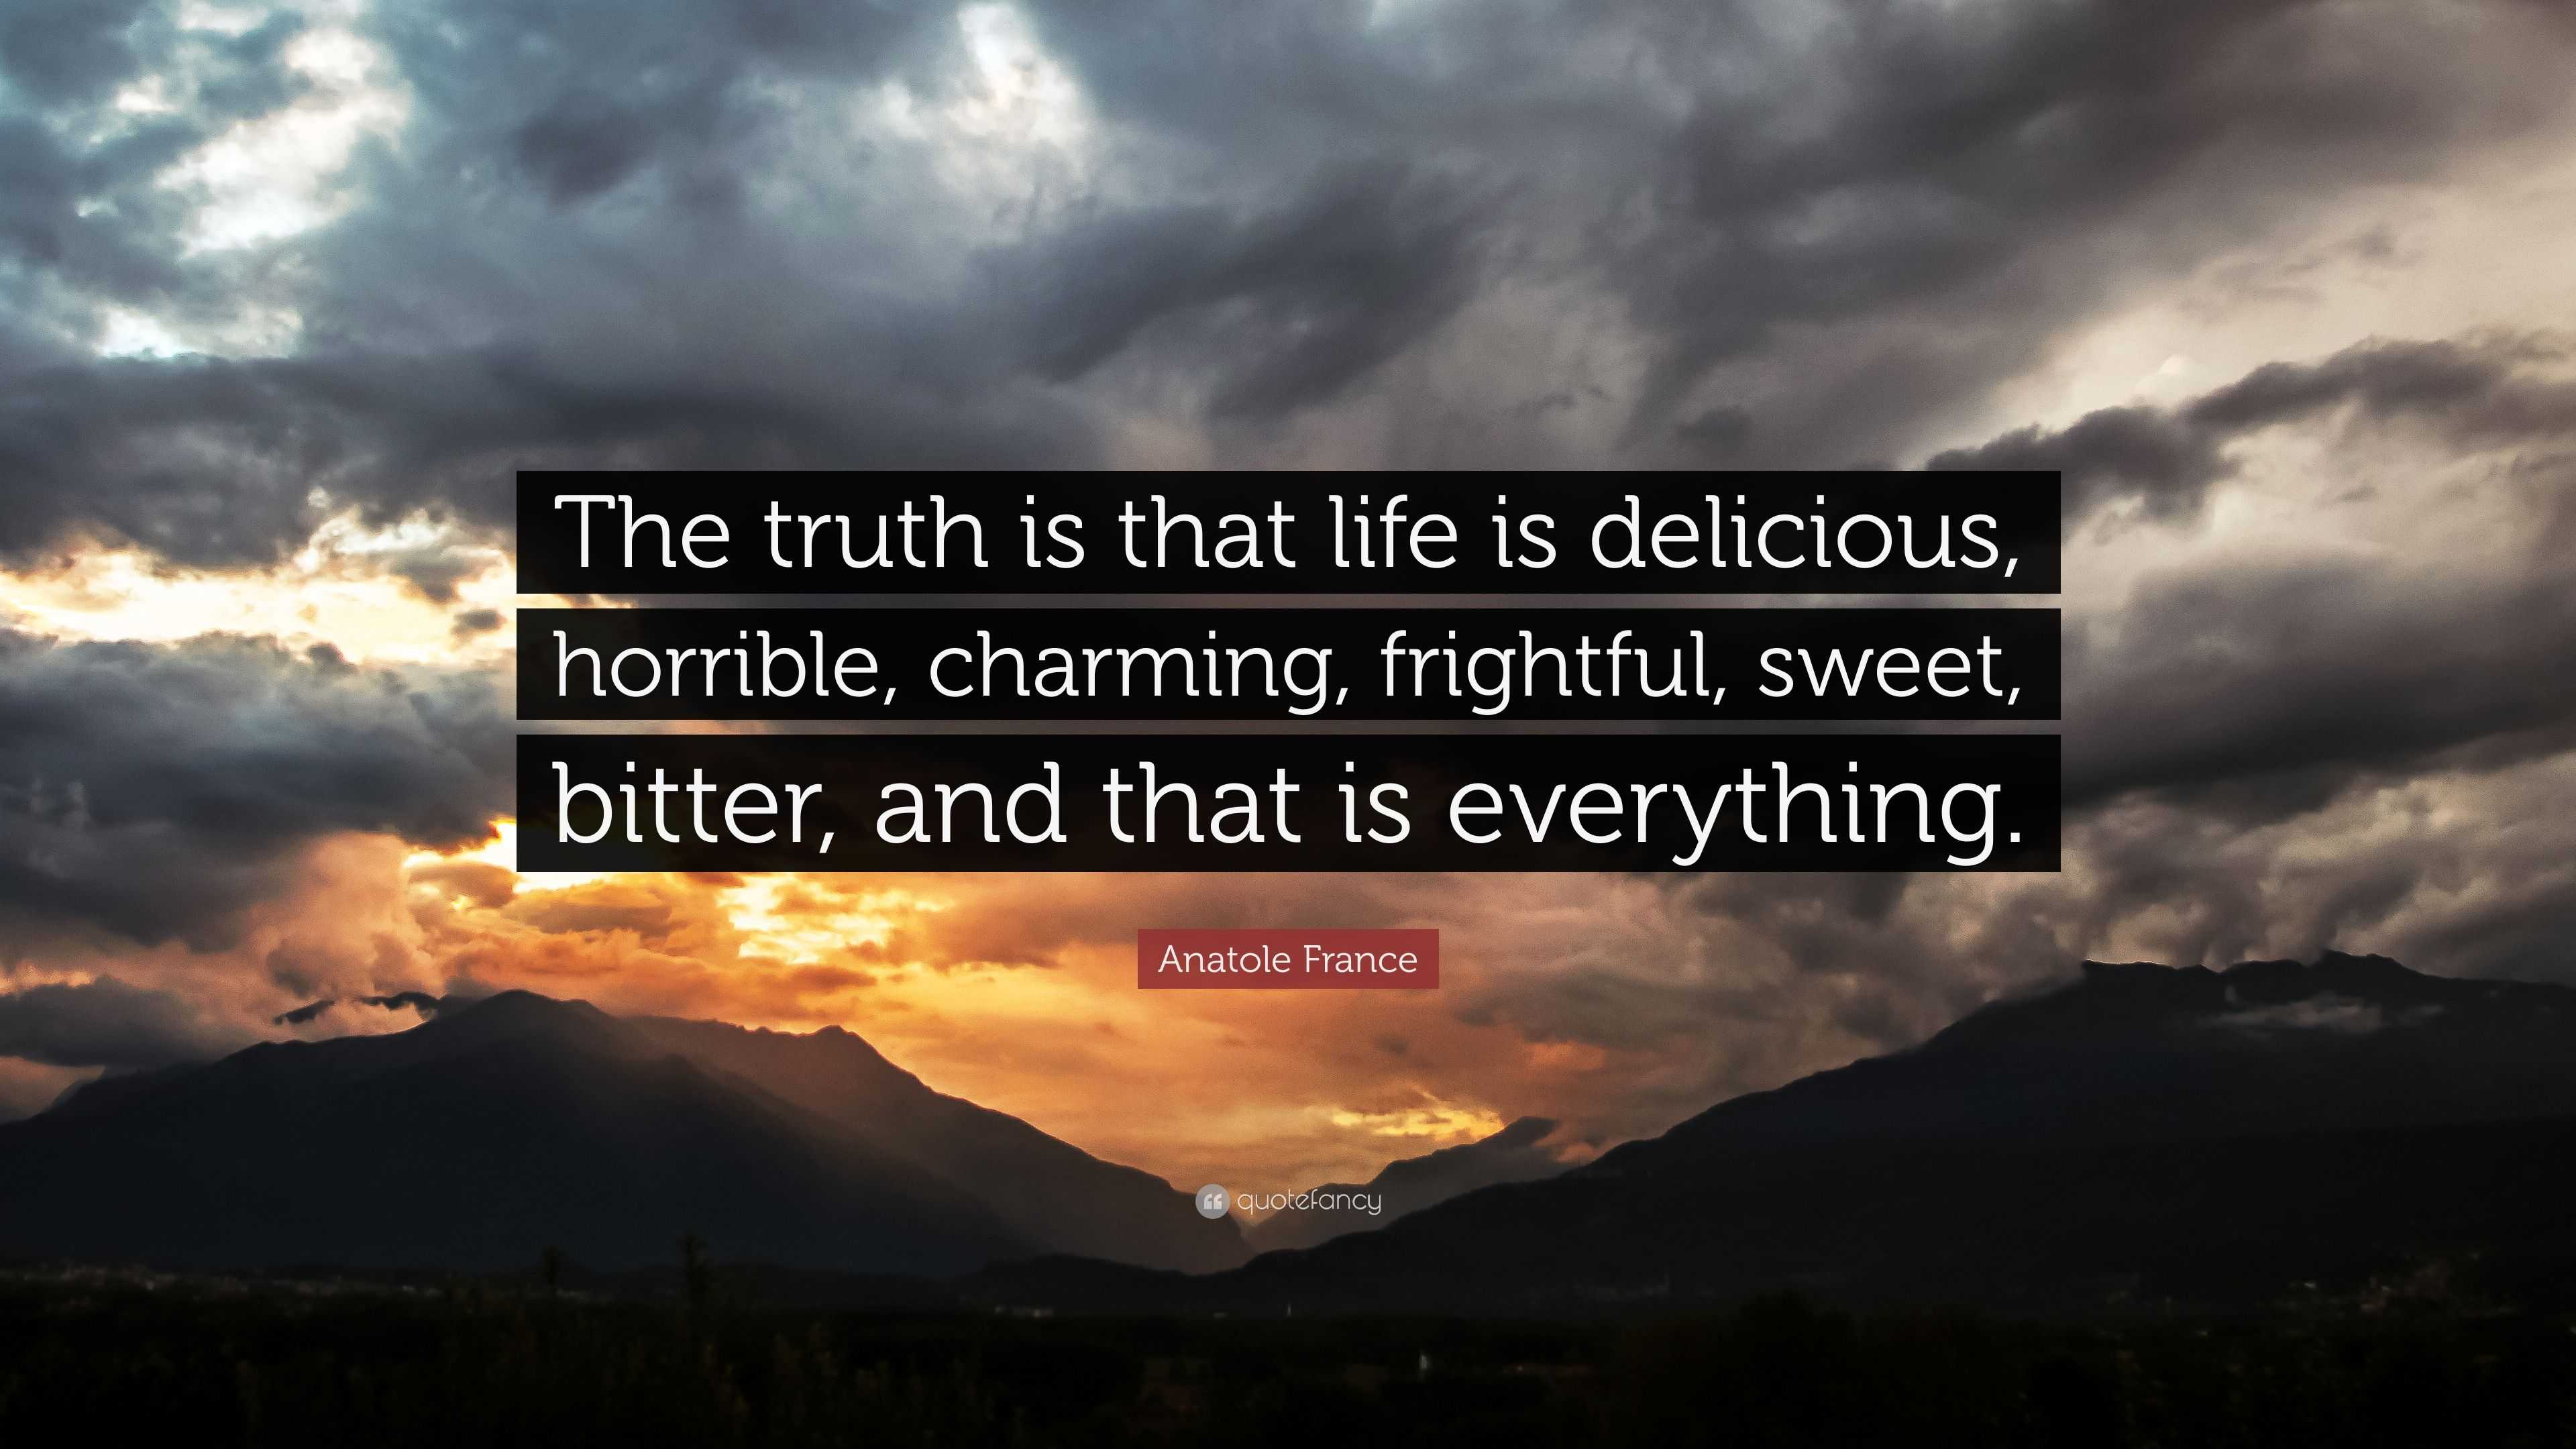 Anatole France Quote “The truth is that life is delicious, horrible